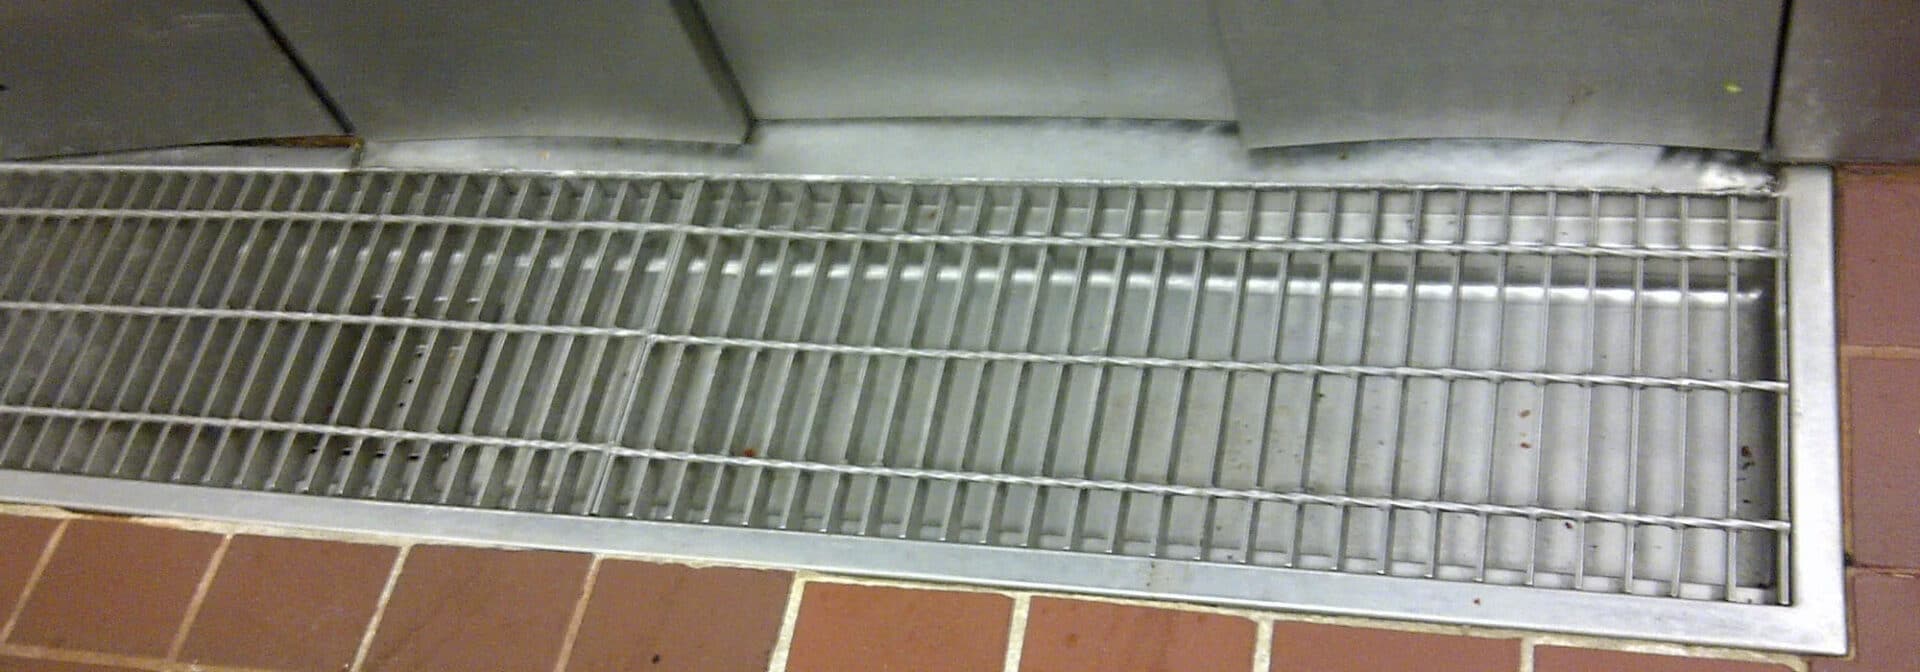 stainless steel trench drain with stainless steel grate in a food and beverage facility